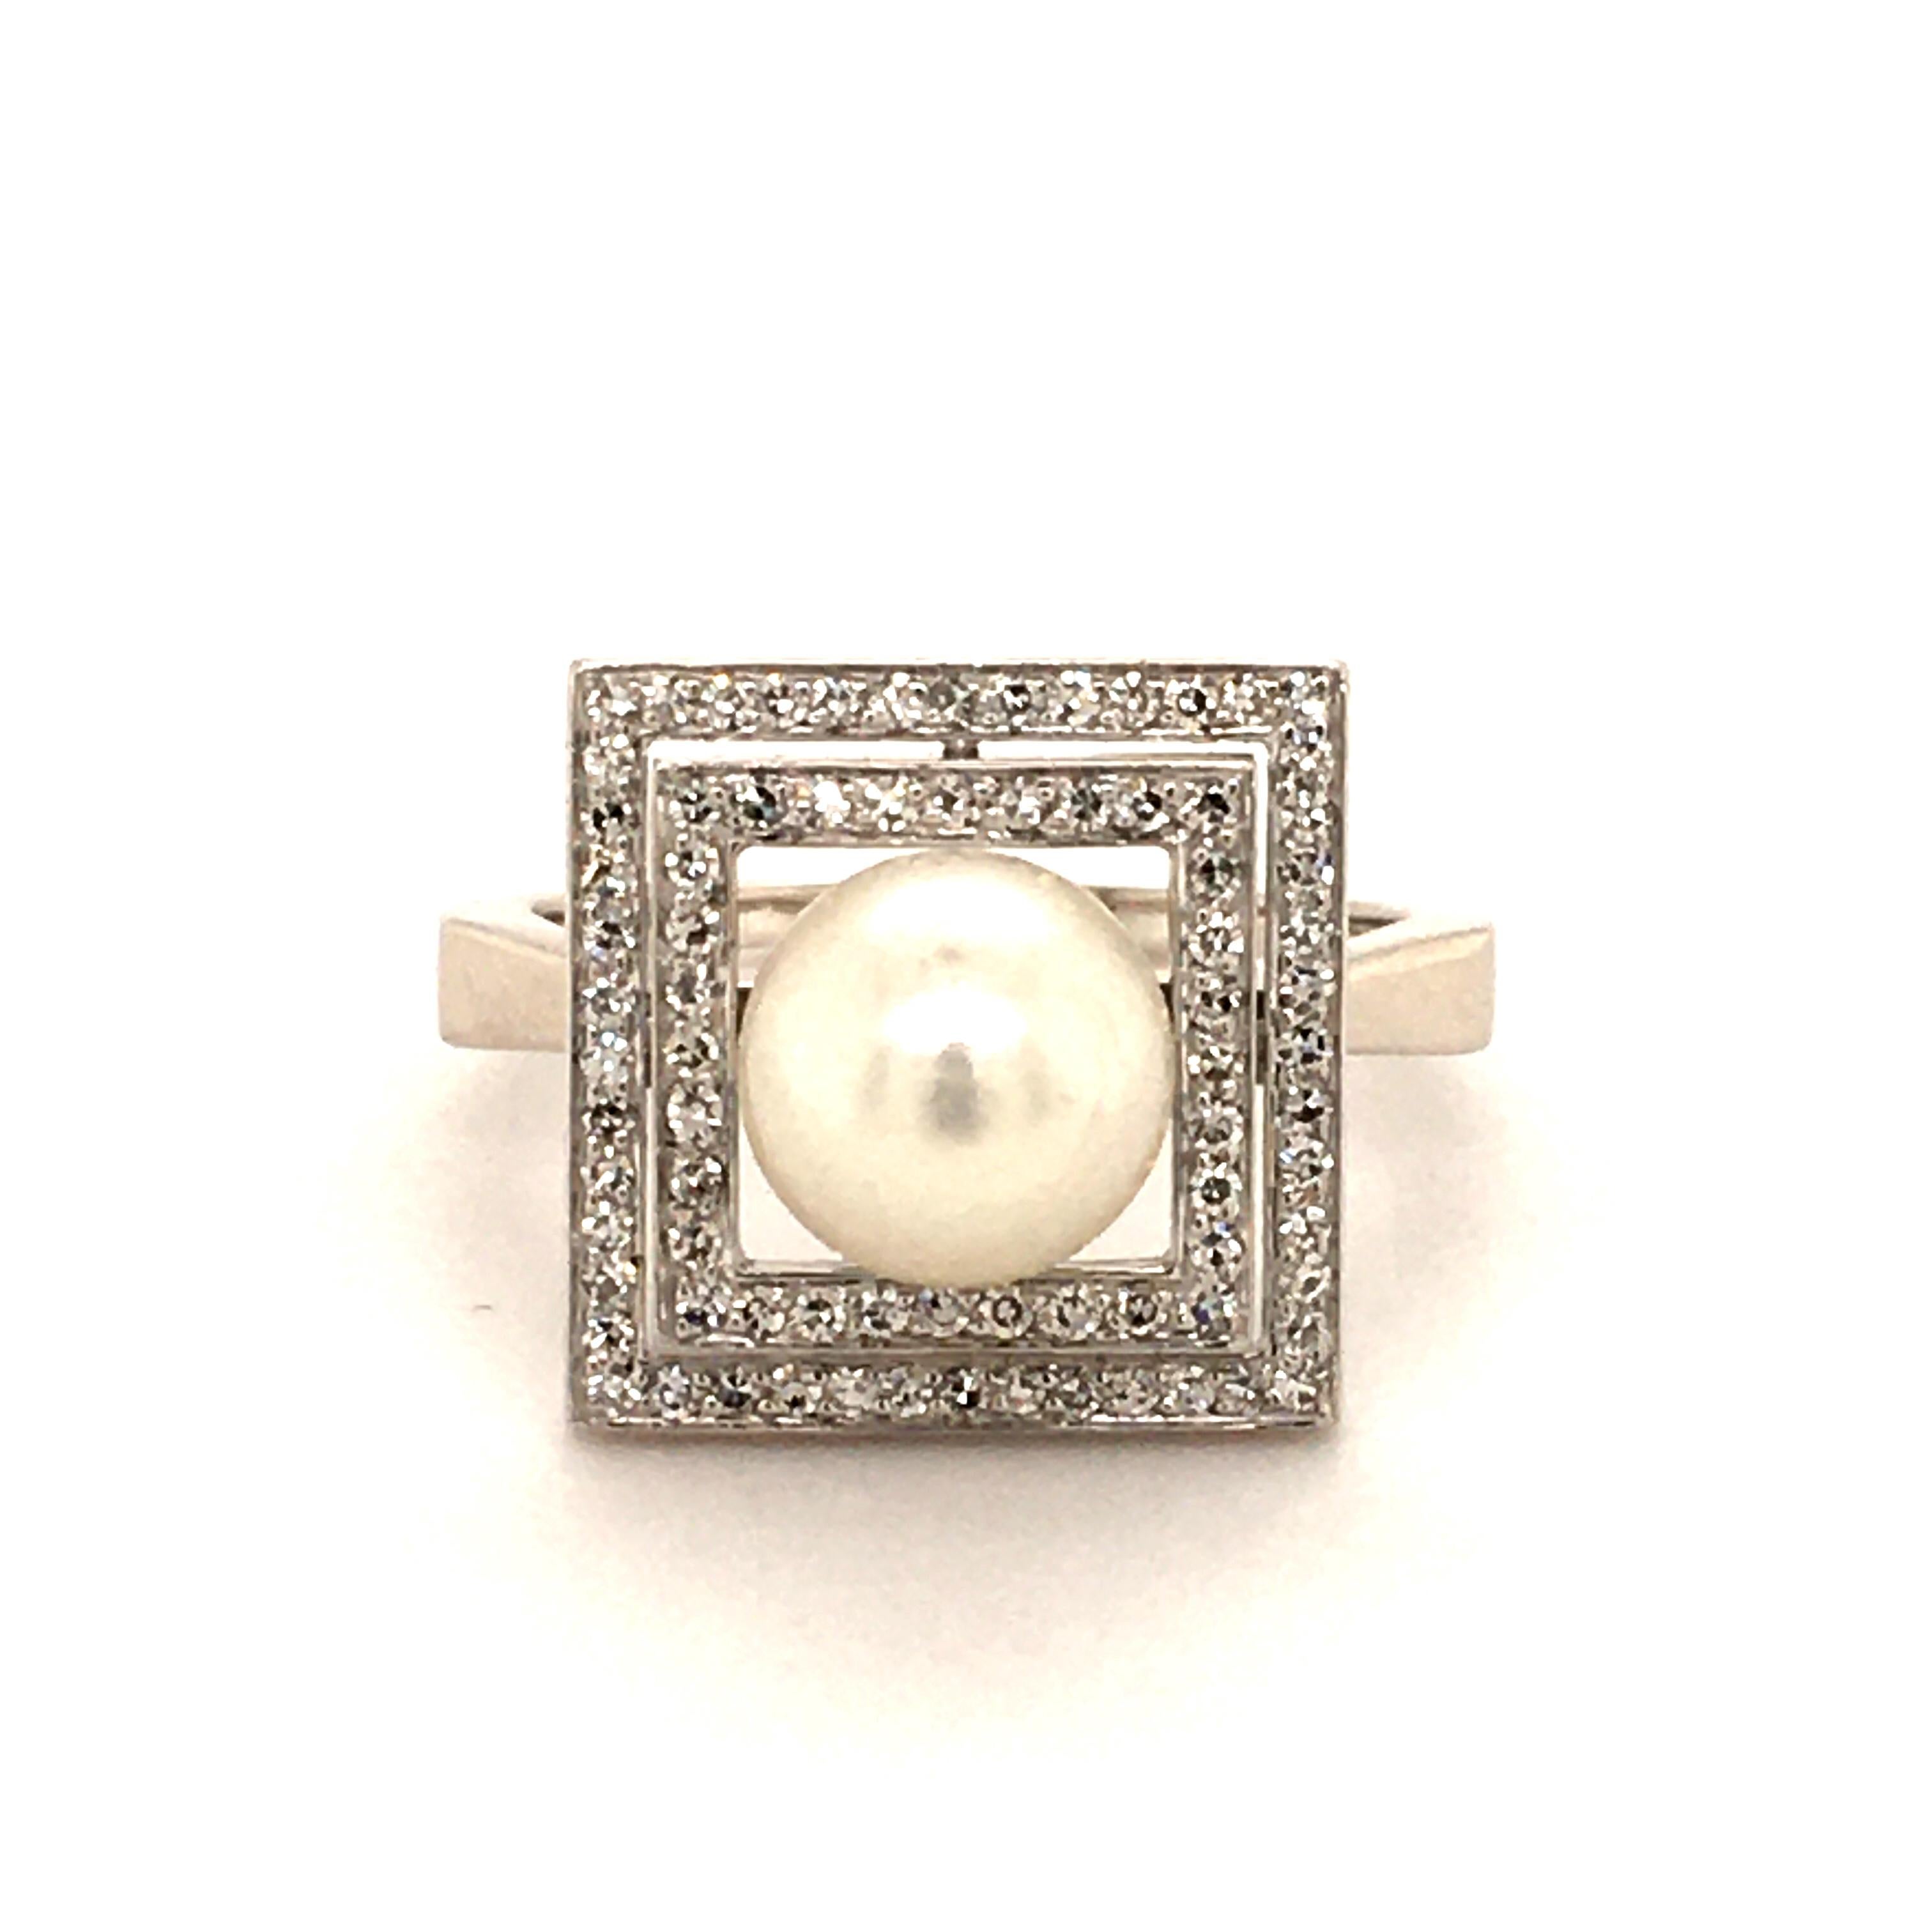 This Ring is made in White Gold 750. Set with a white Akoya-Pearl, Diameter: 8.5 mm, Form: round, Surface: slightly blemished, Luster: very good 
Surrounded by single cut diamonds (Quality: G/H-vs)
The play of shapes between angular and round